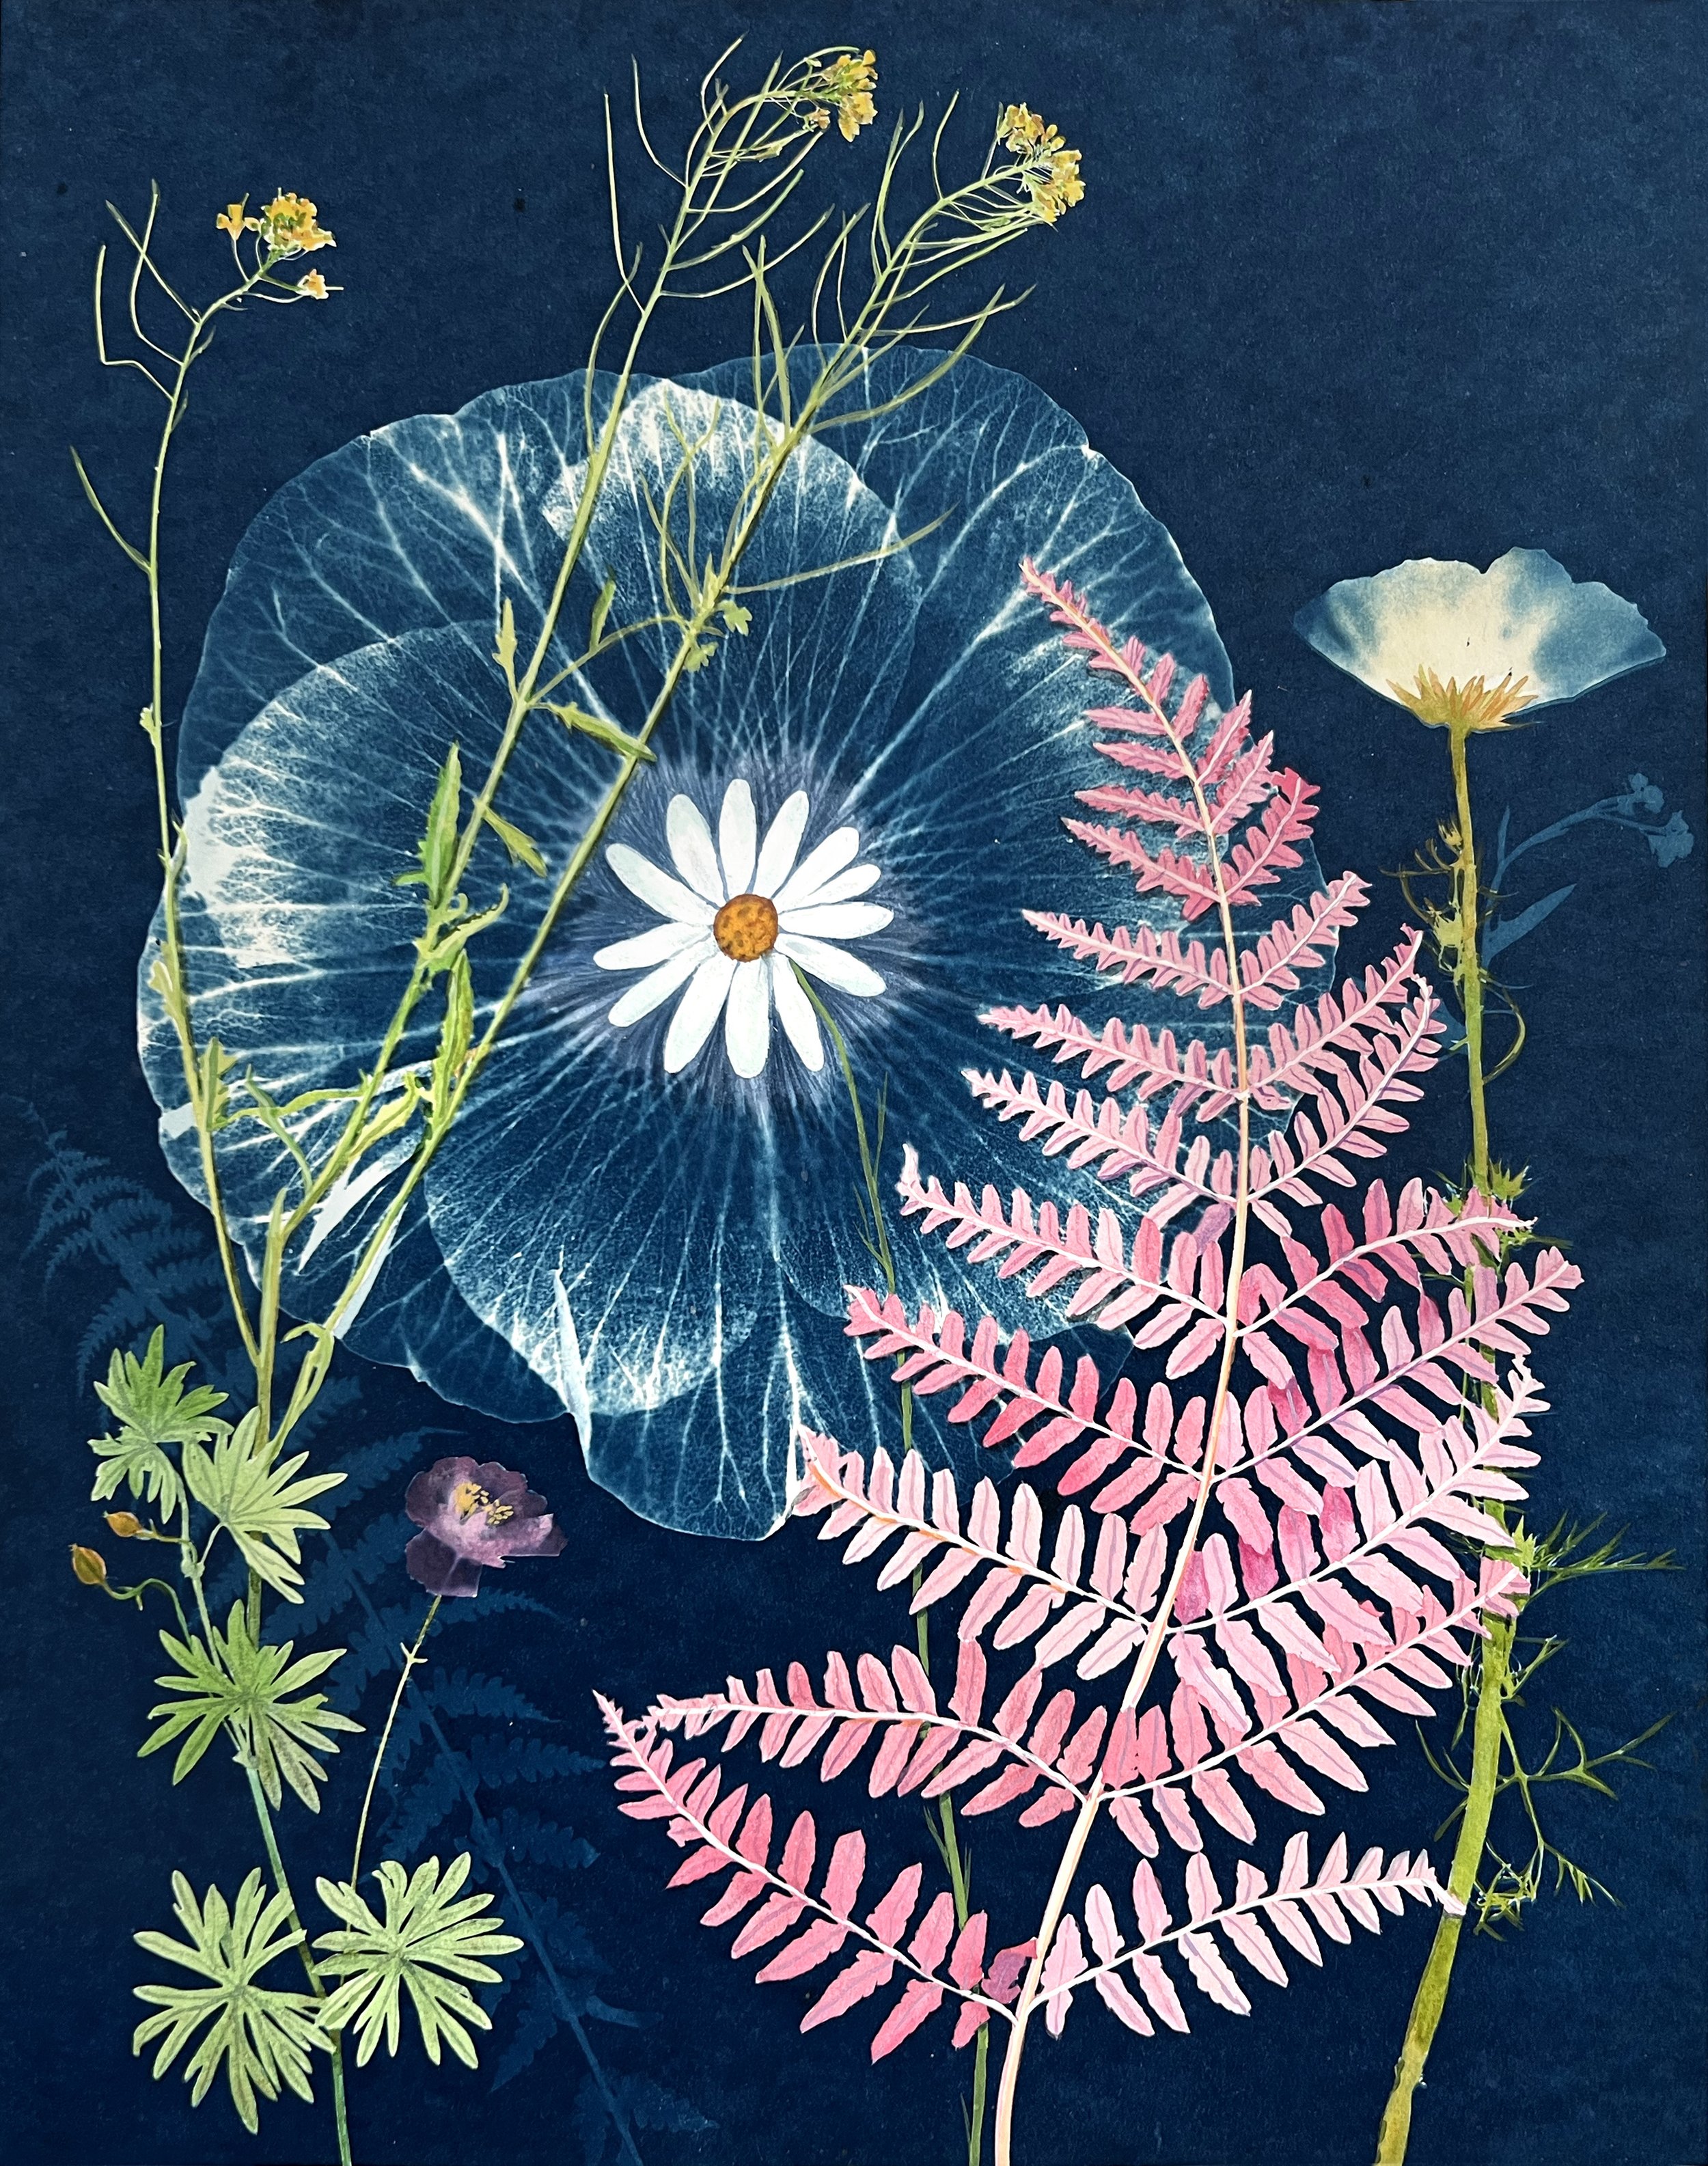 2022, 14" x 11" watercolor, gouache and cyanotype on watercolor paper